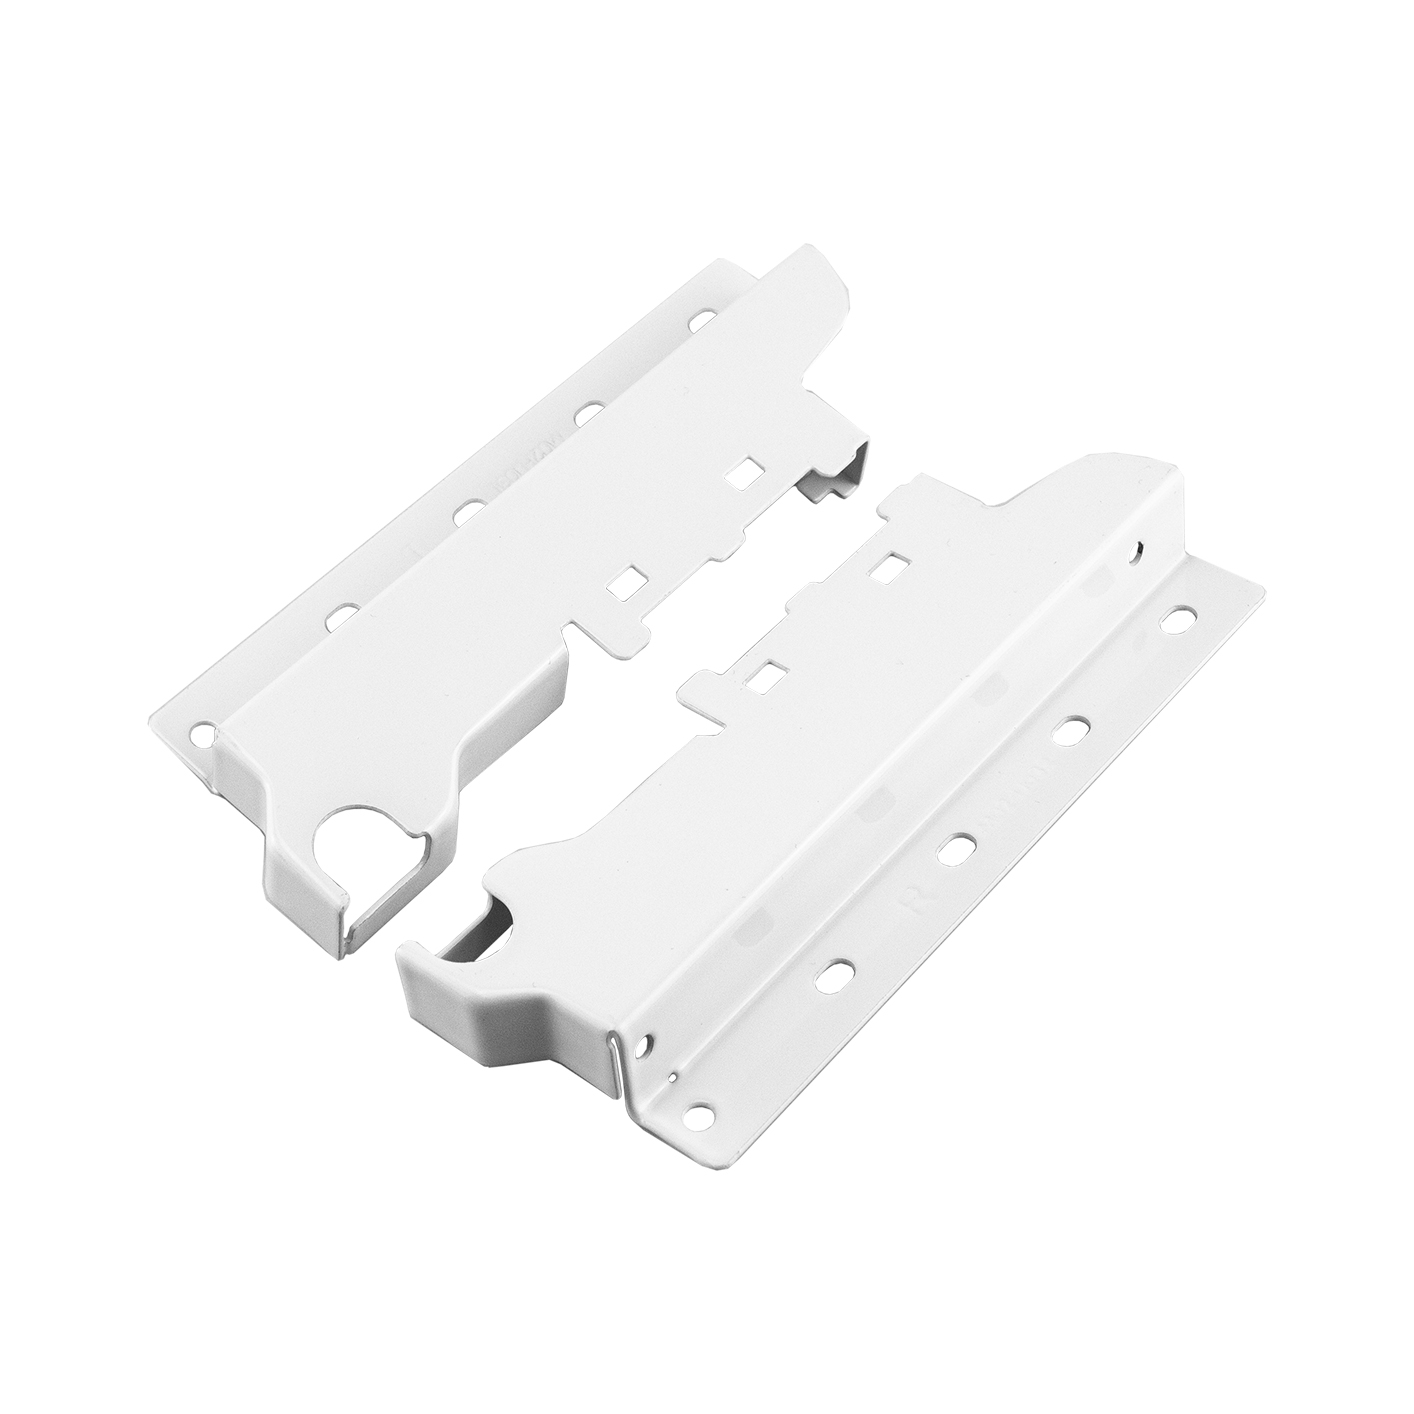 For Single Lateral Rail with 115mm Height Sides, Rear Fixing Brackets